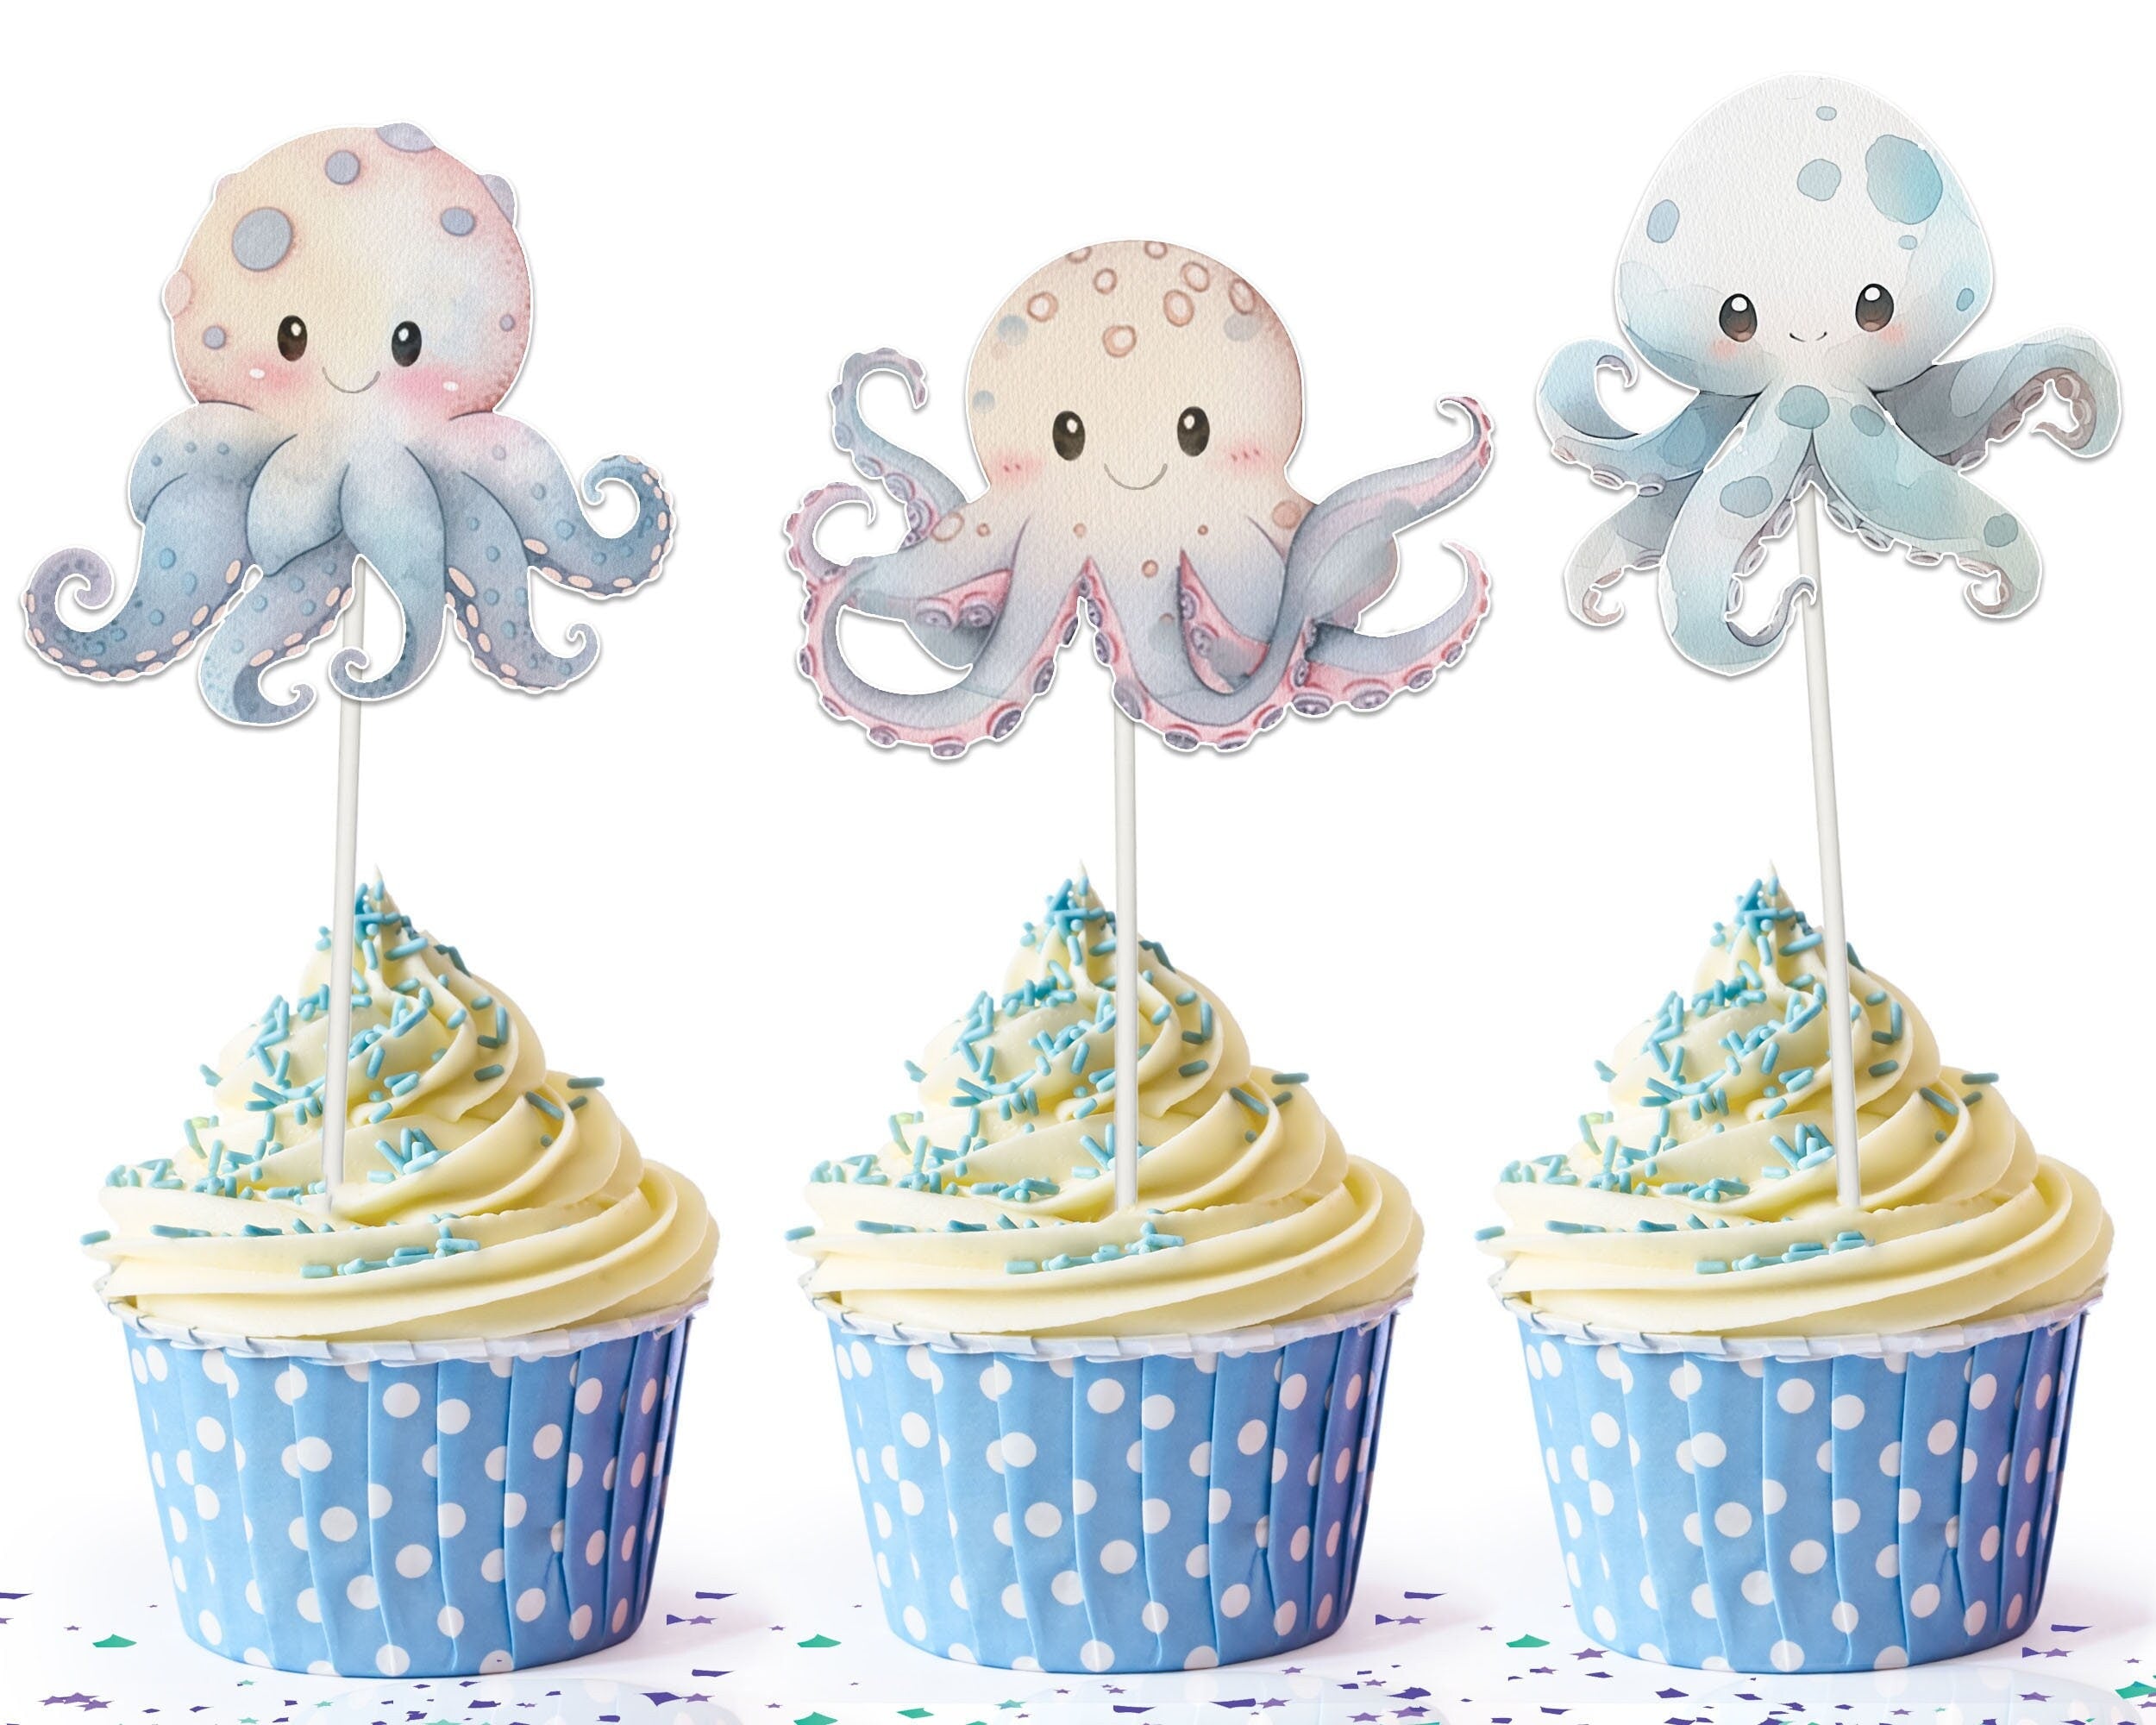 Ocean Whirl" Octopus Cupcake Toppers - Submerge Your Sweets in Sea Splendor